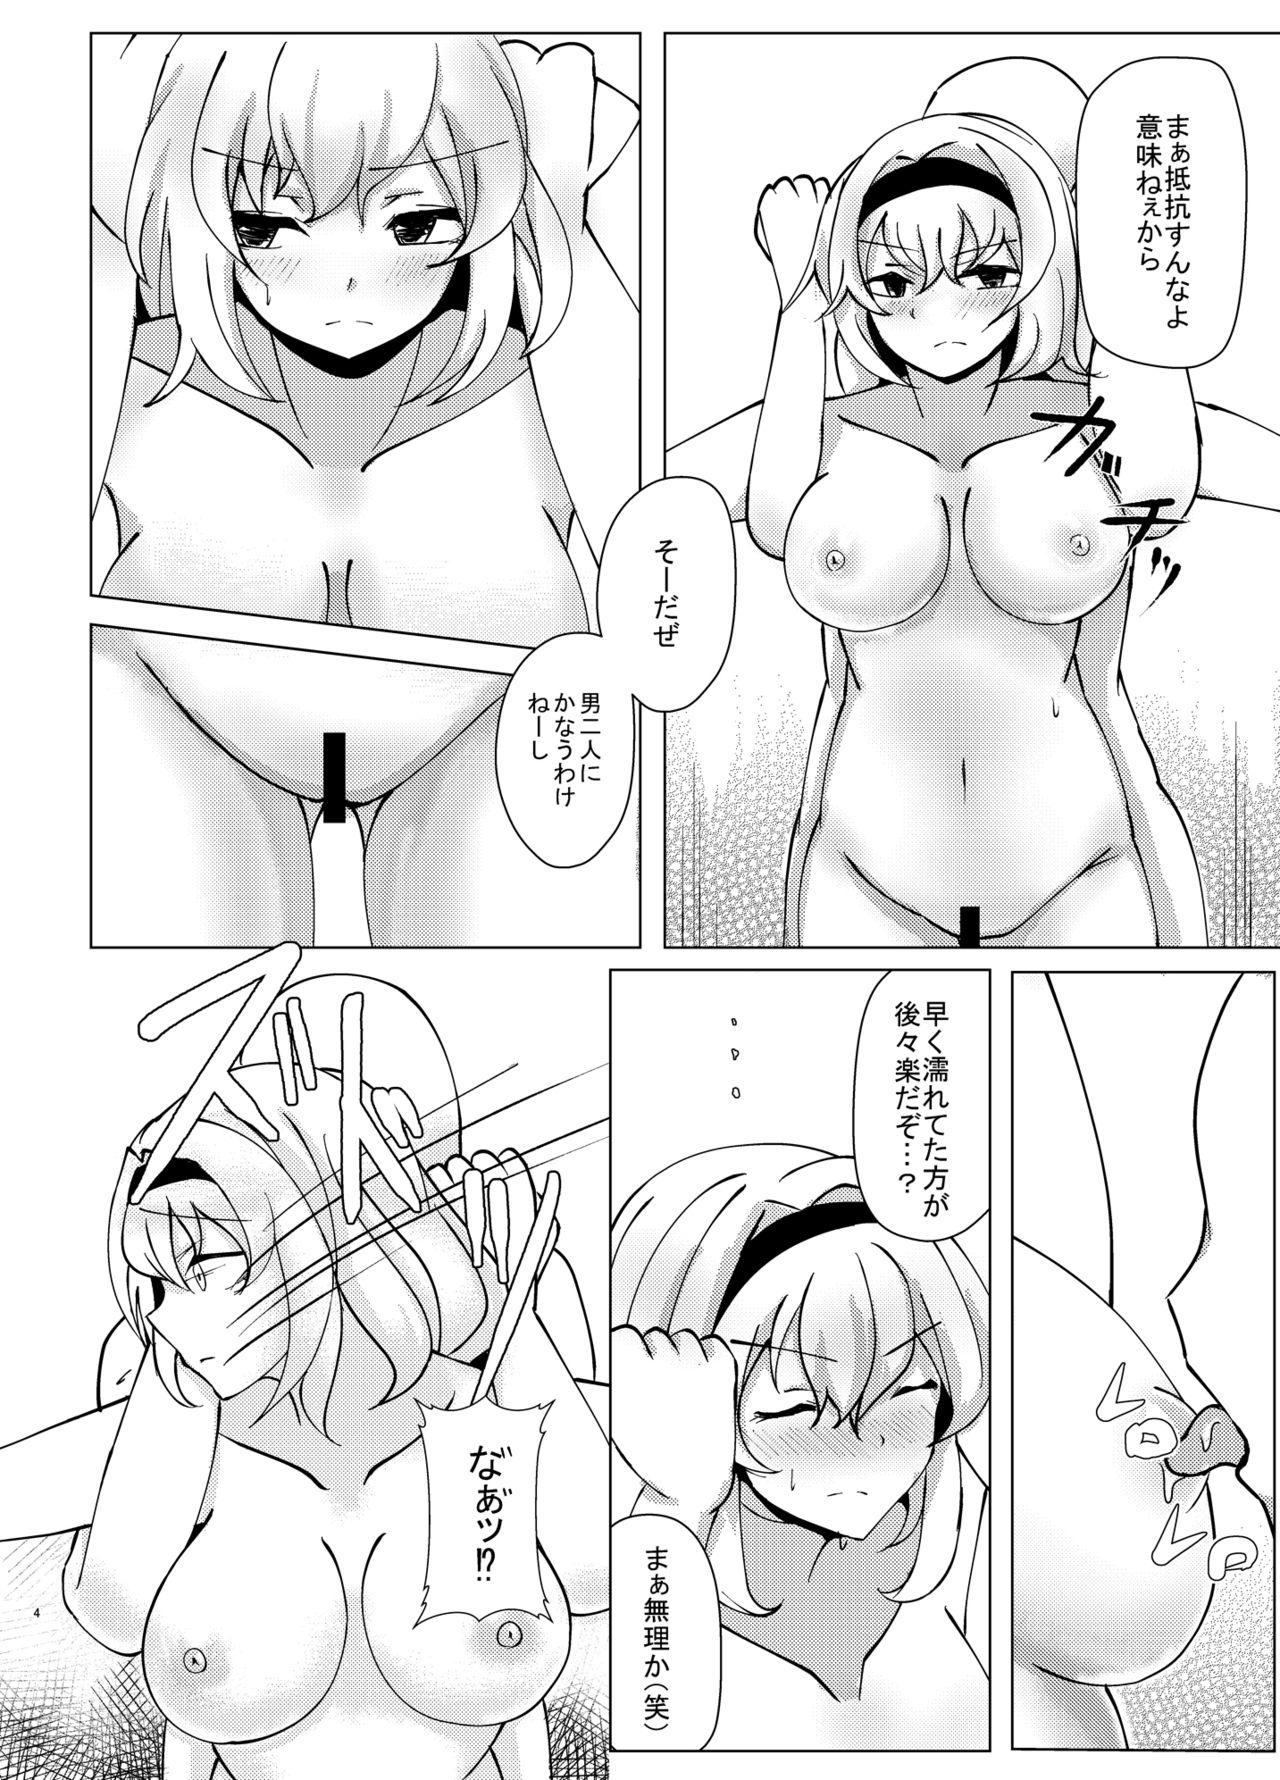 Gay Money ー耐えたら何とかなる？ - Touhou project Free Amatuer Porn - Page 4